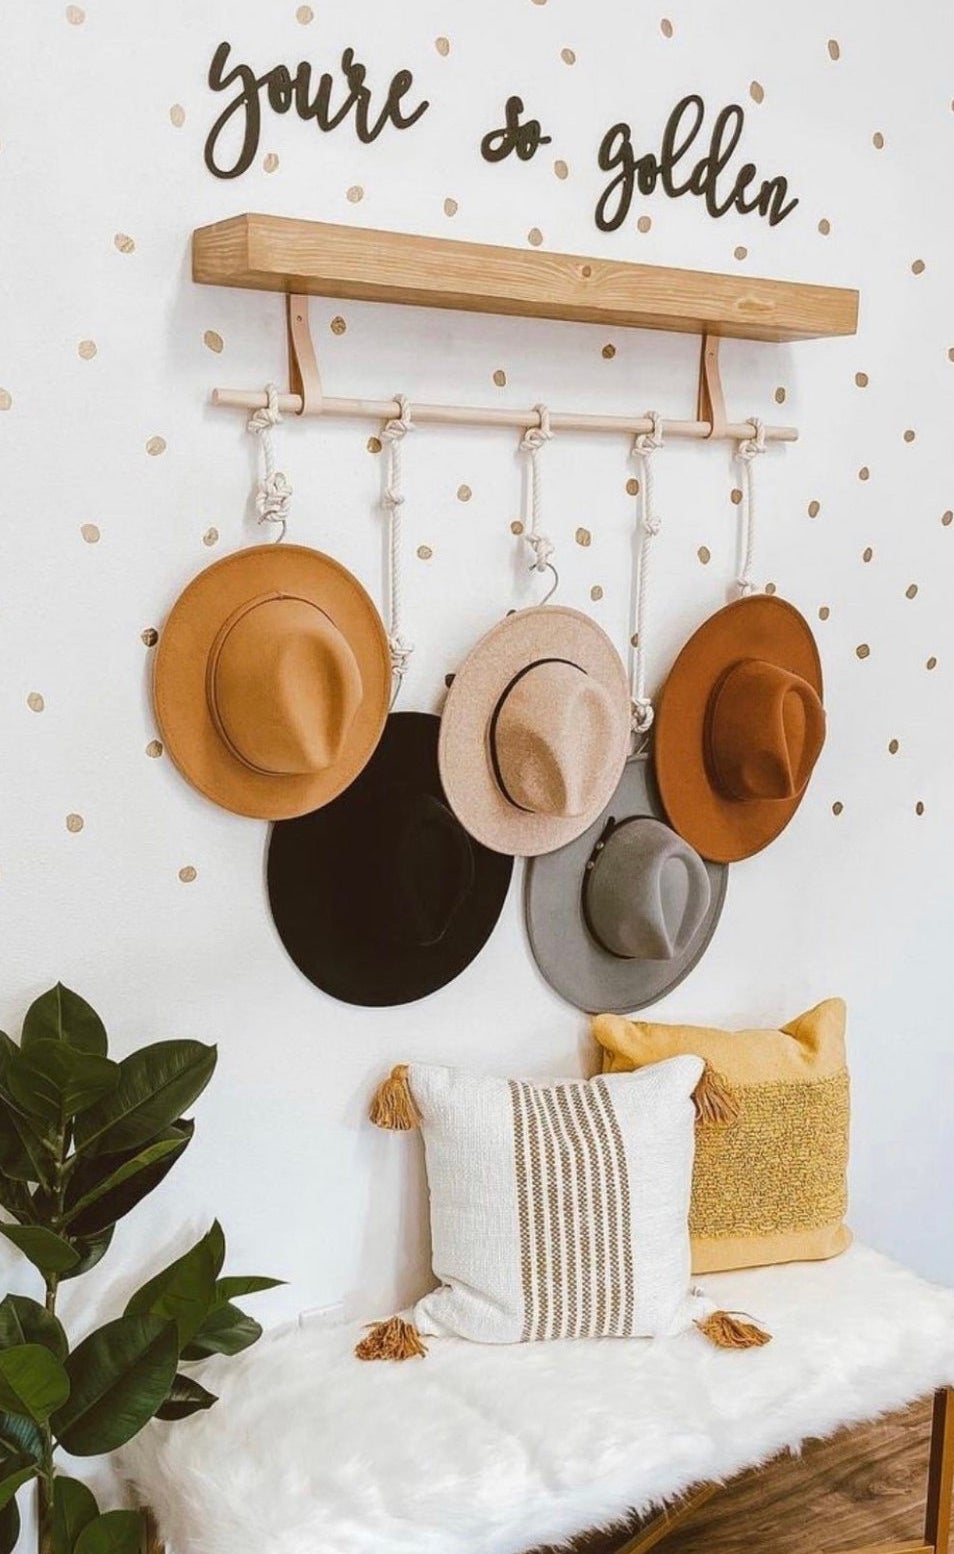 hats hanging from the hooks